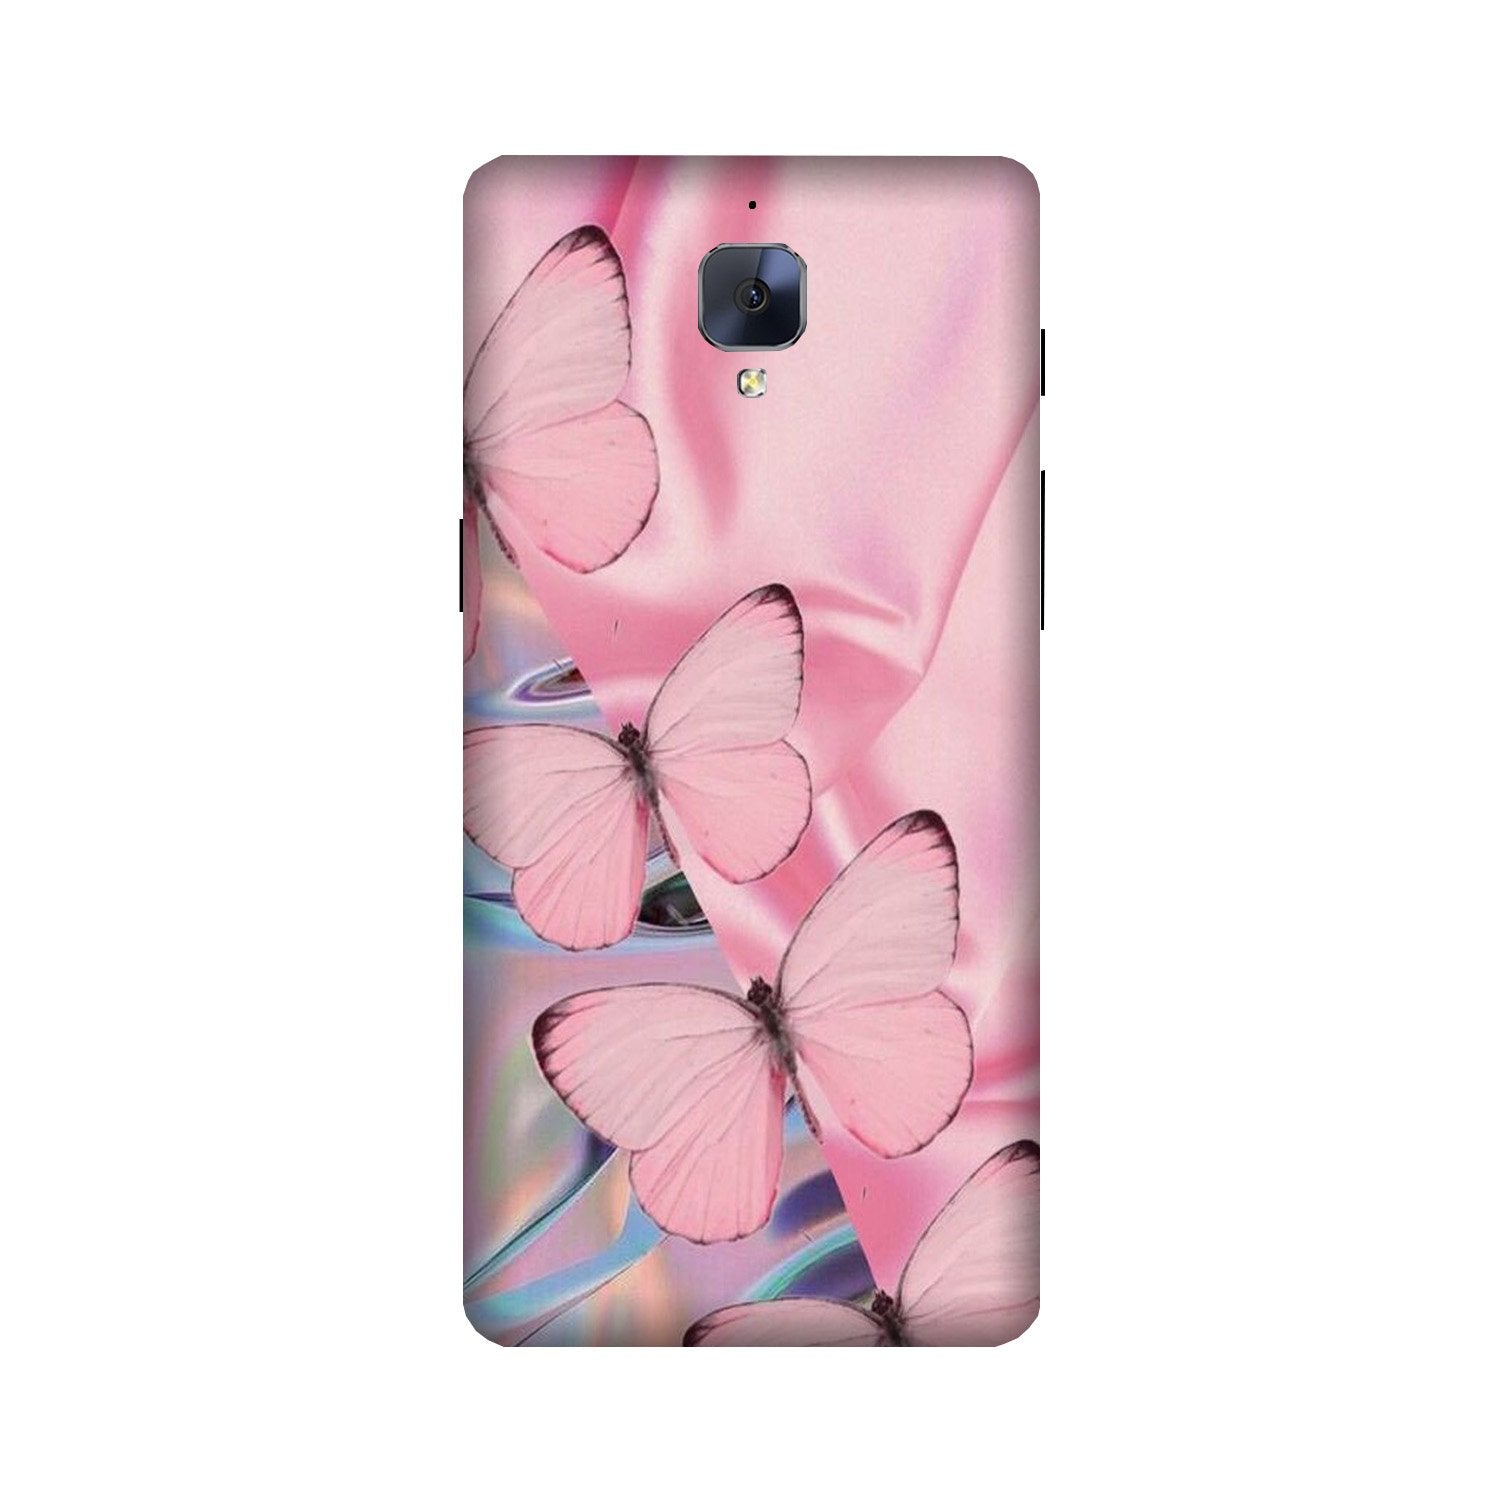 Butterflies Case for OnePlus 3/ 3T